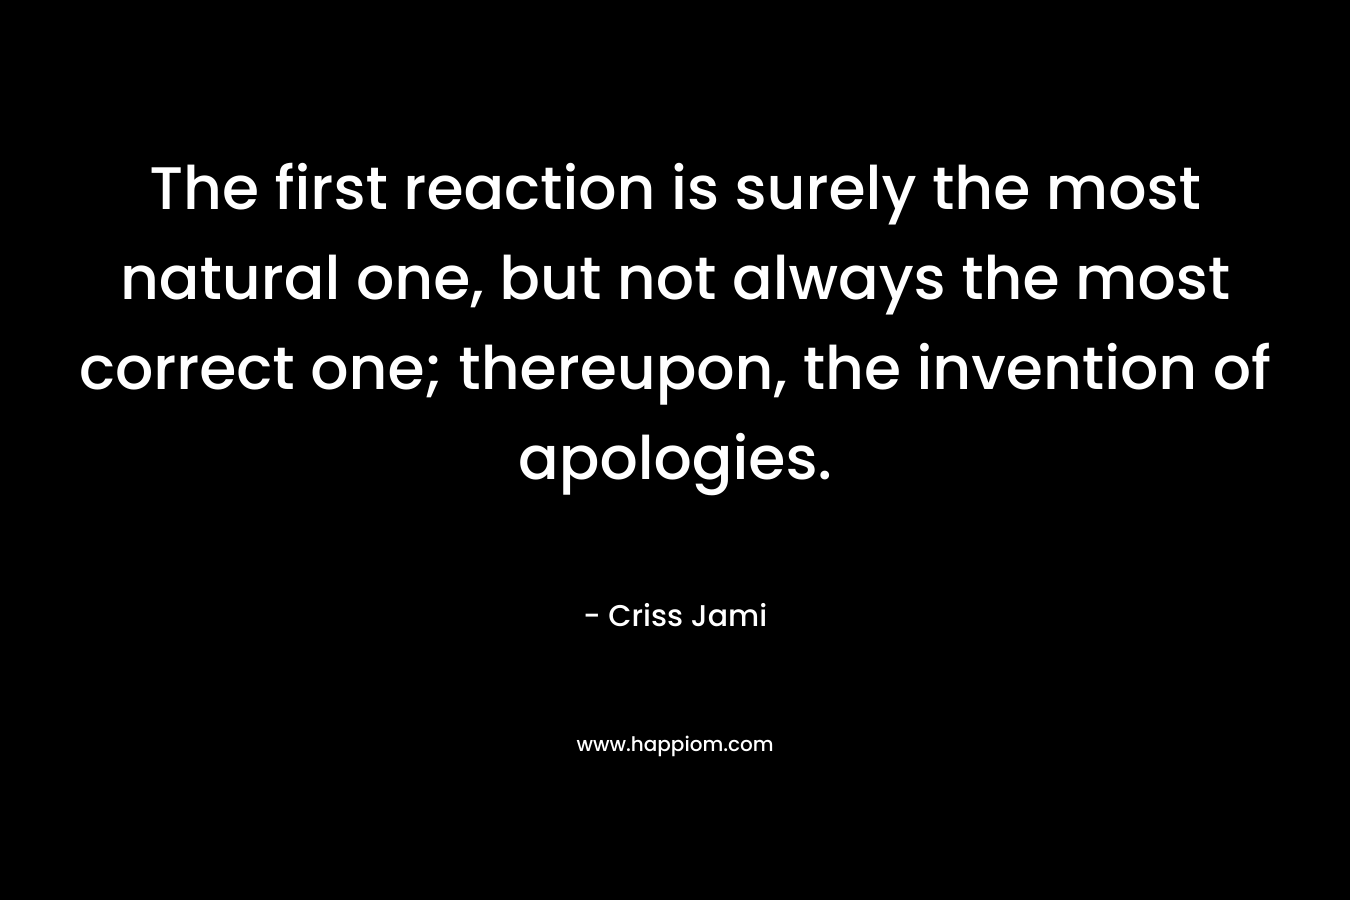 The first reaction is surely the most natural one, but not always the most correct one; thereupon, the invention of apologies.